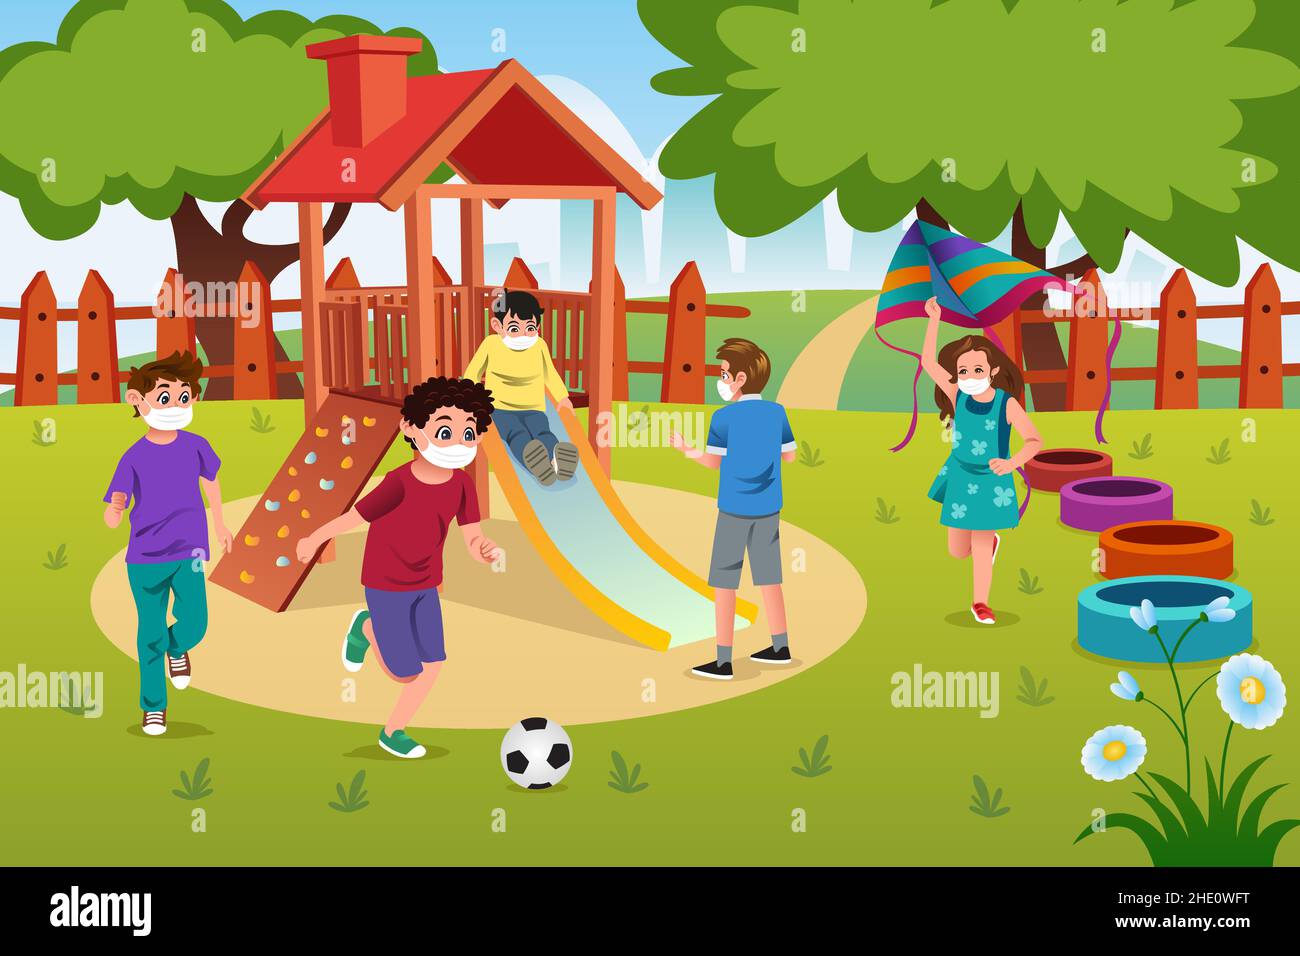 A vector illustration of Kids Playing in the Playground Wearing Masks Stock Vector